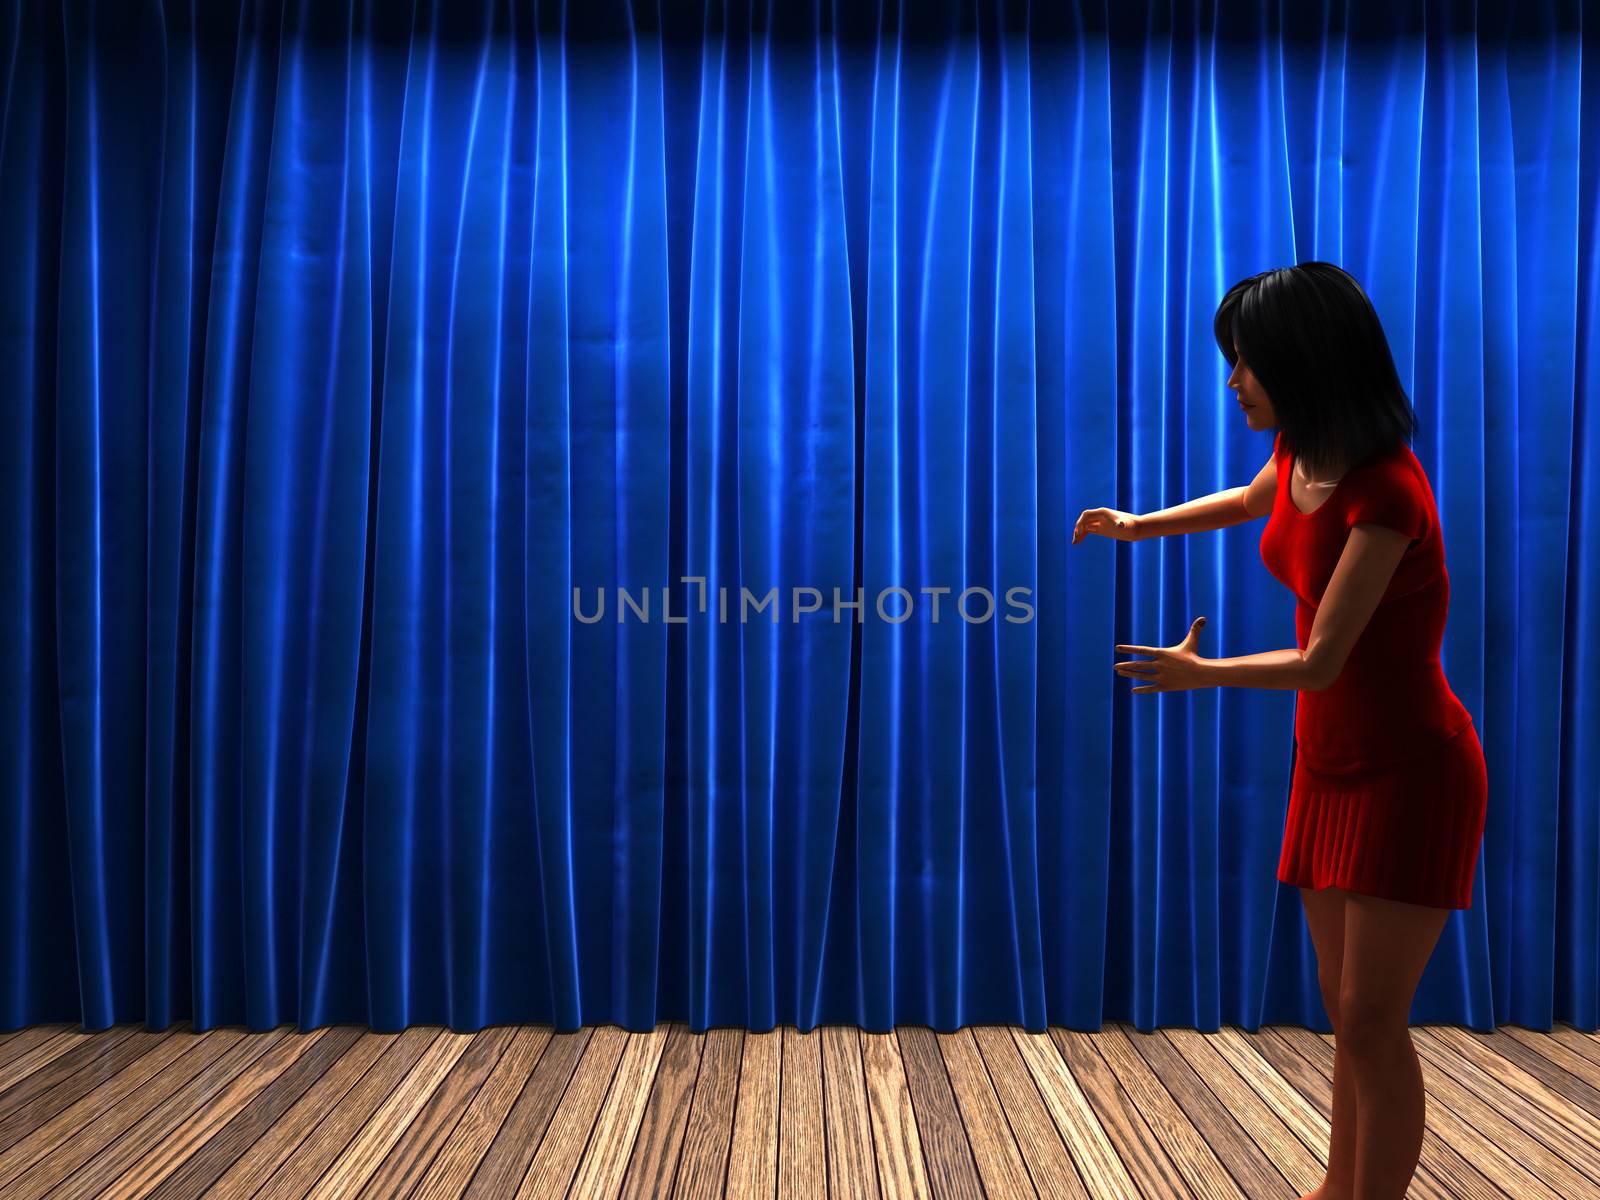 woman and curtain stage by videodoctor